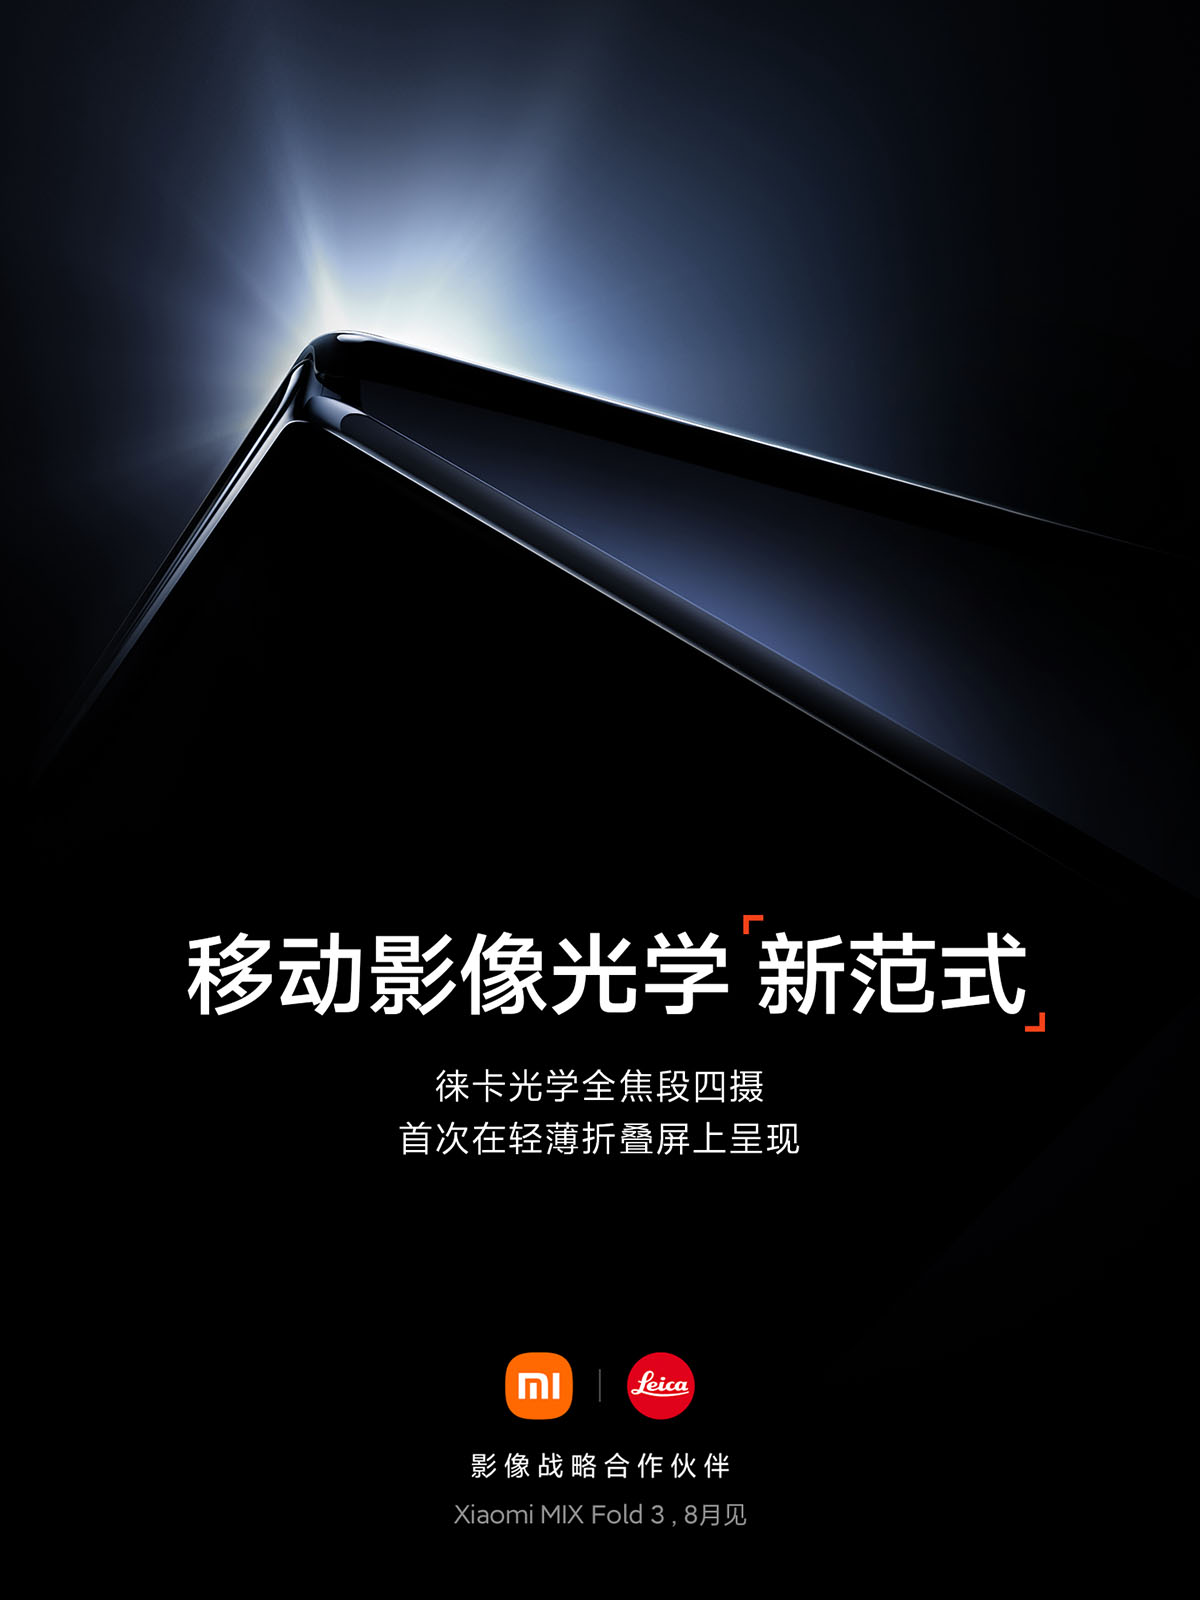 Xiaomi OPPO Oneplus foldables teaser samsung unpacked